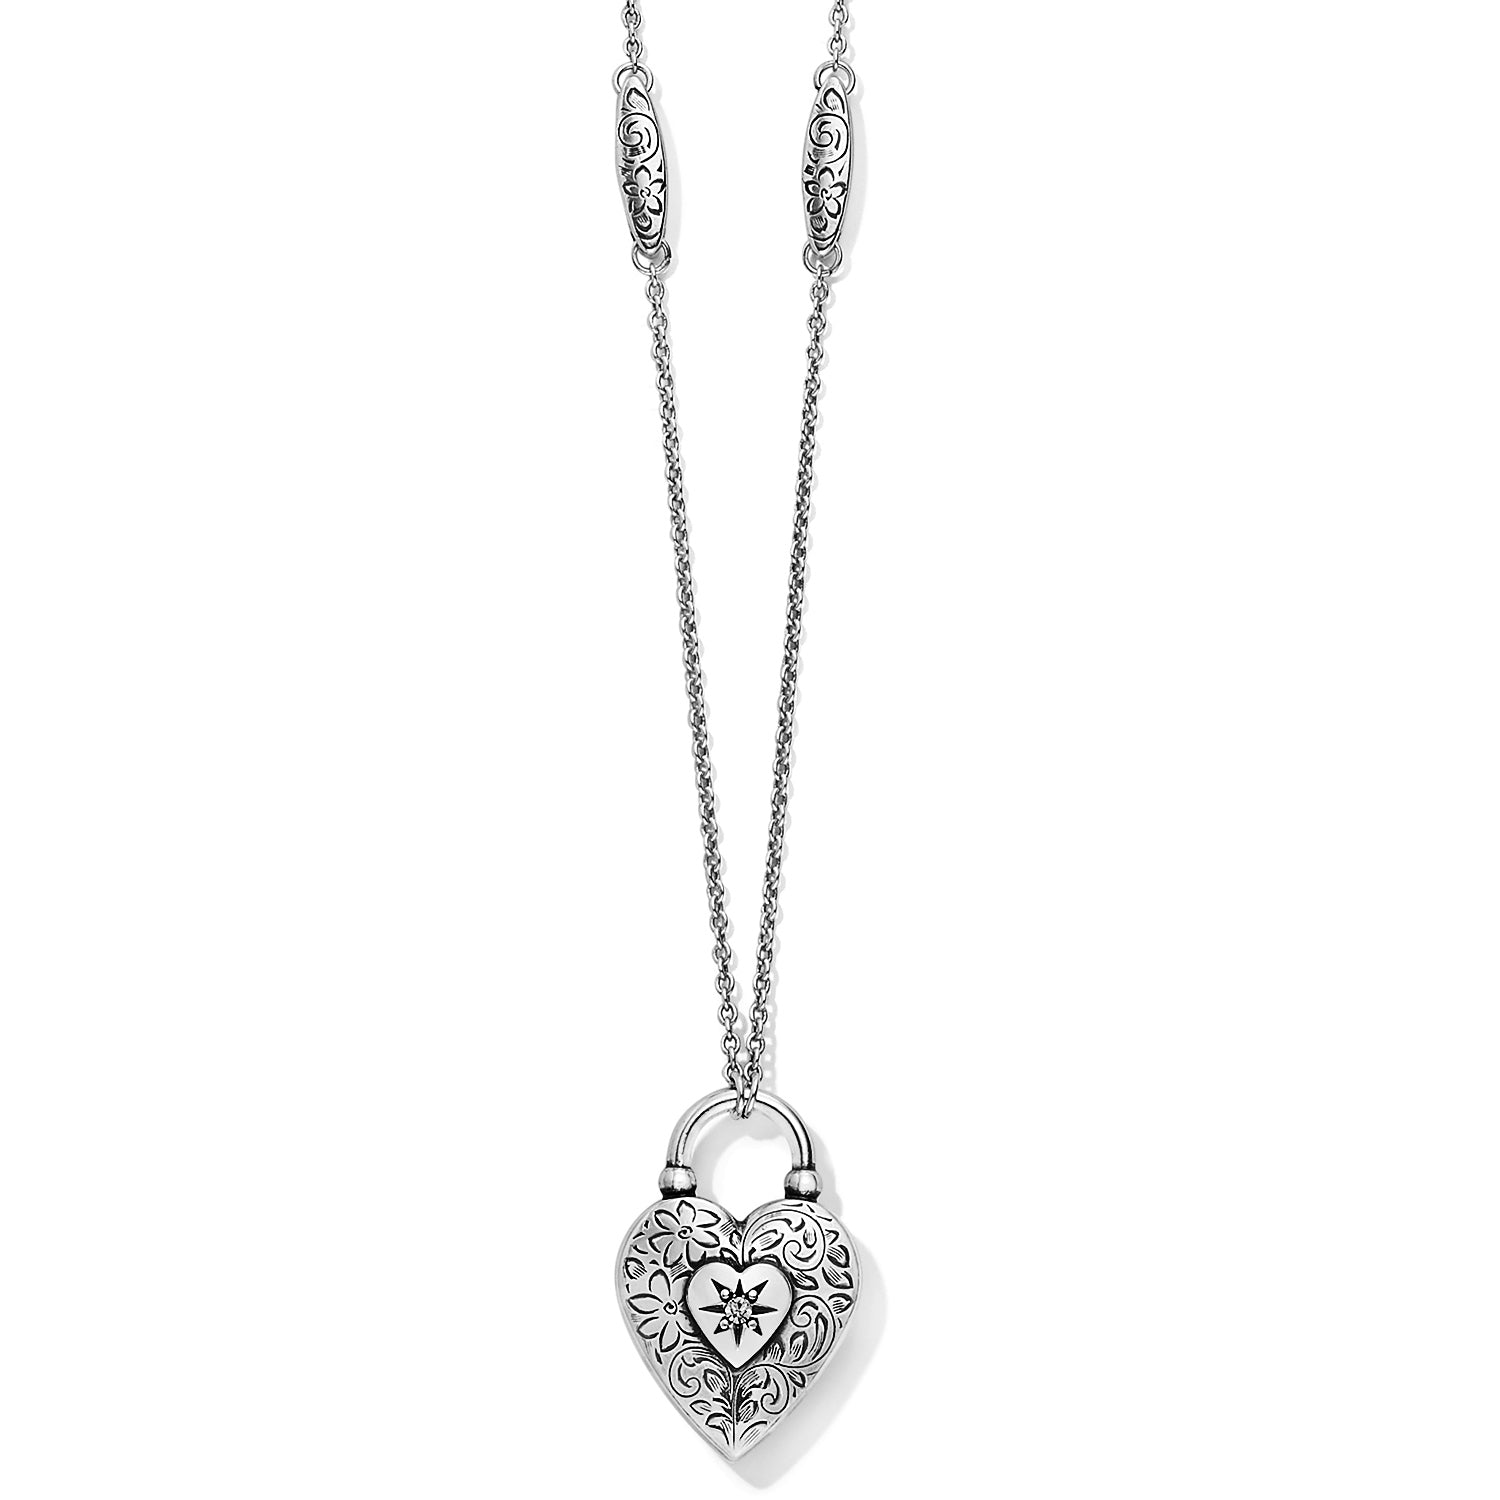 One Heart Long Necklace